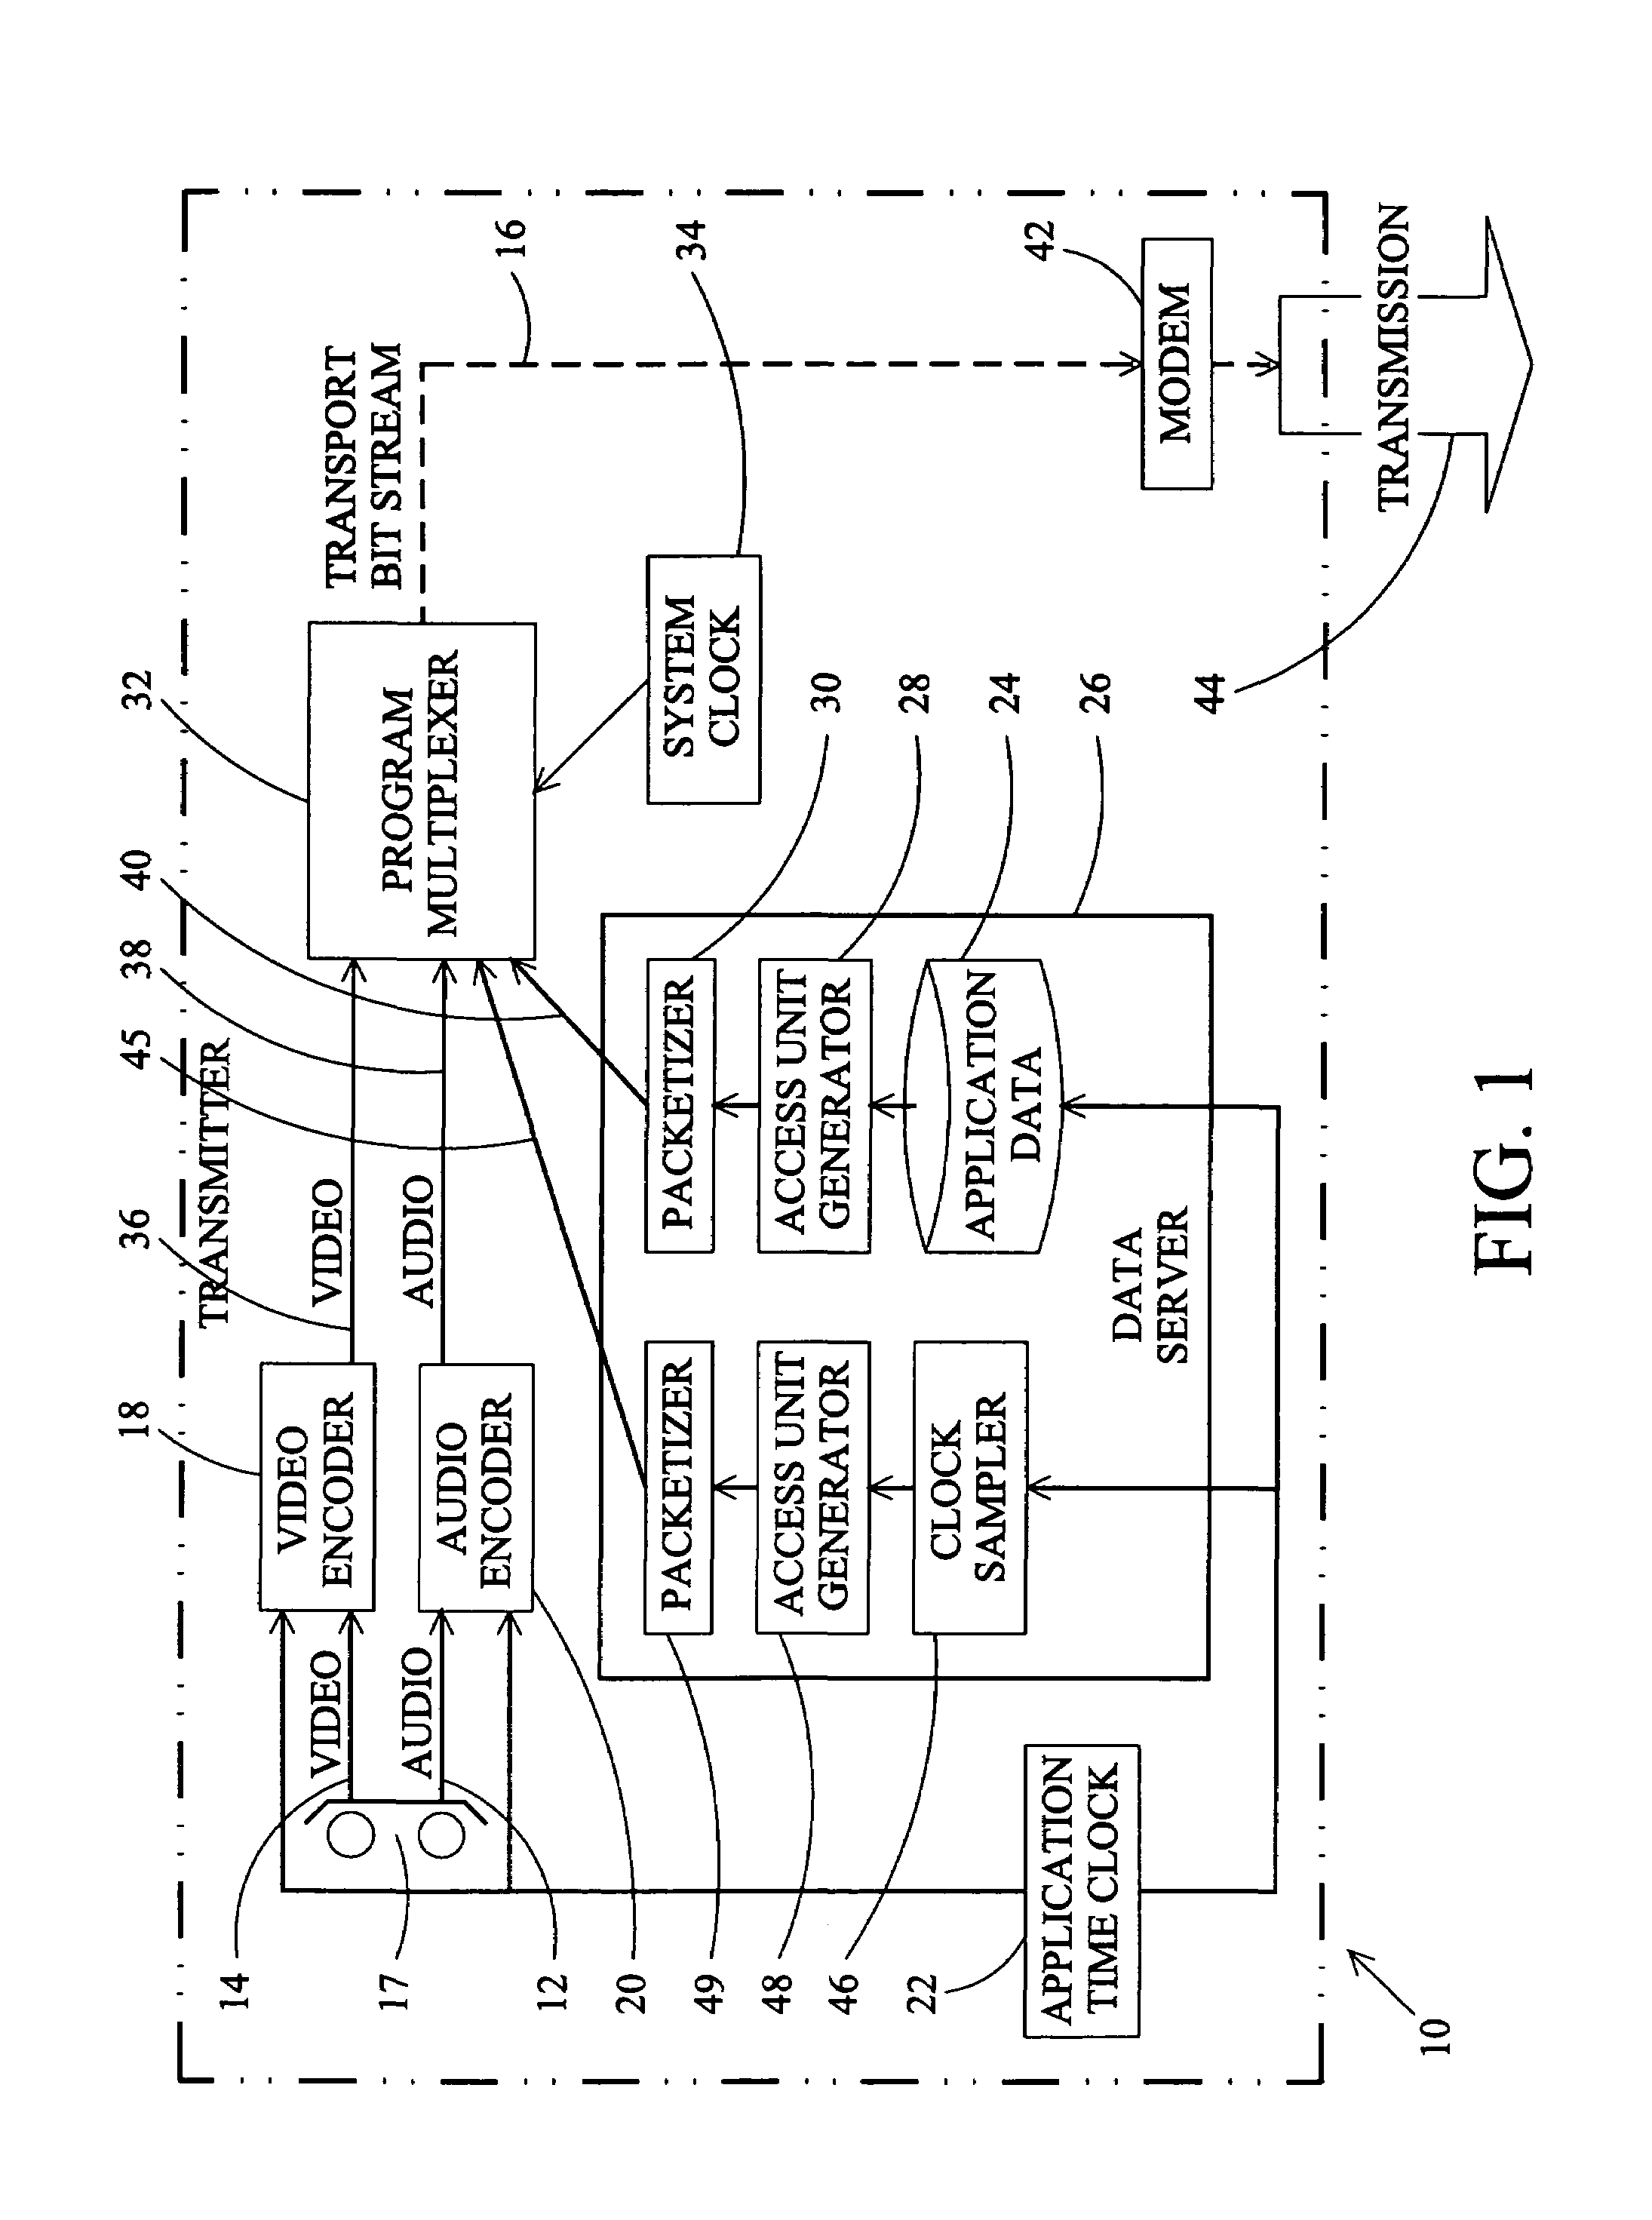 Method of synchronizing events with a digital television audio-visual program